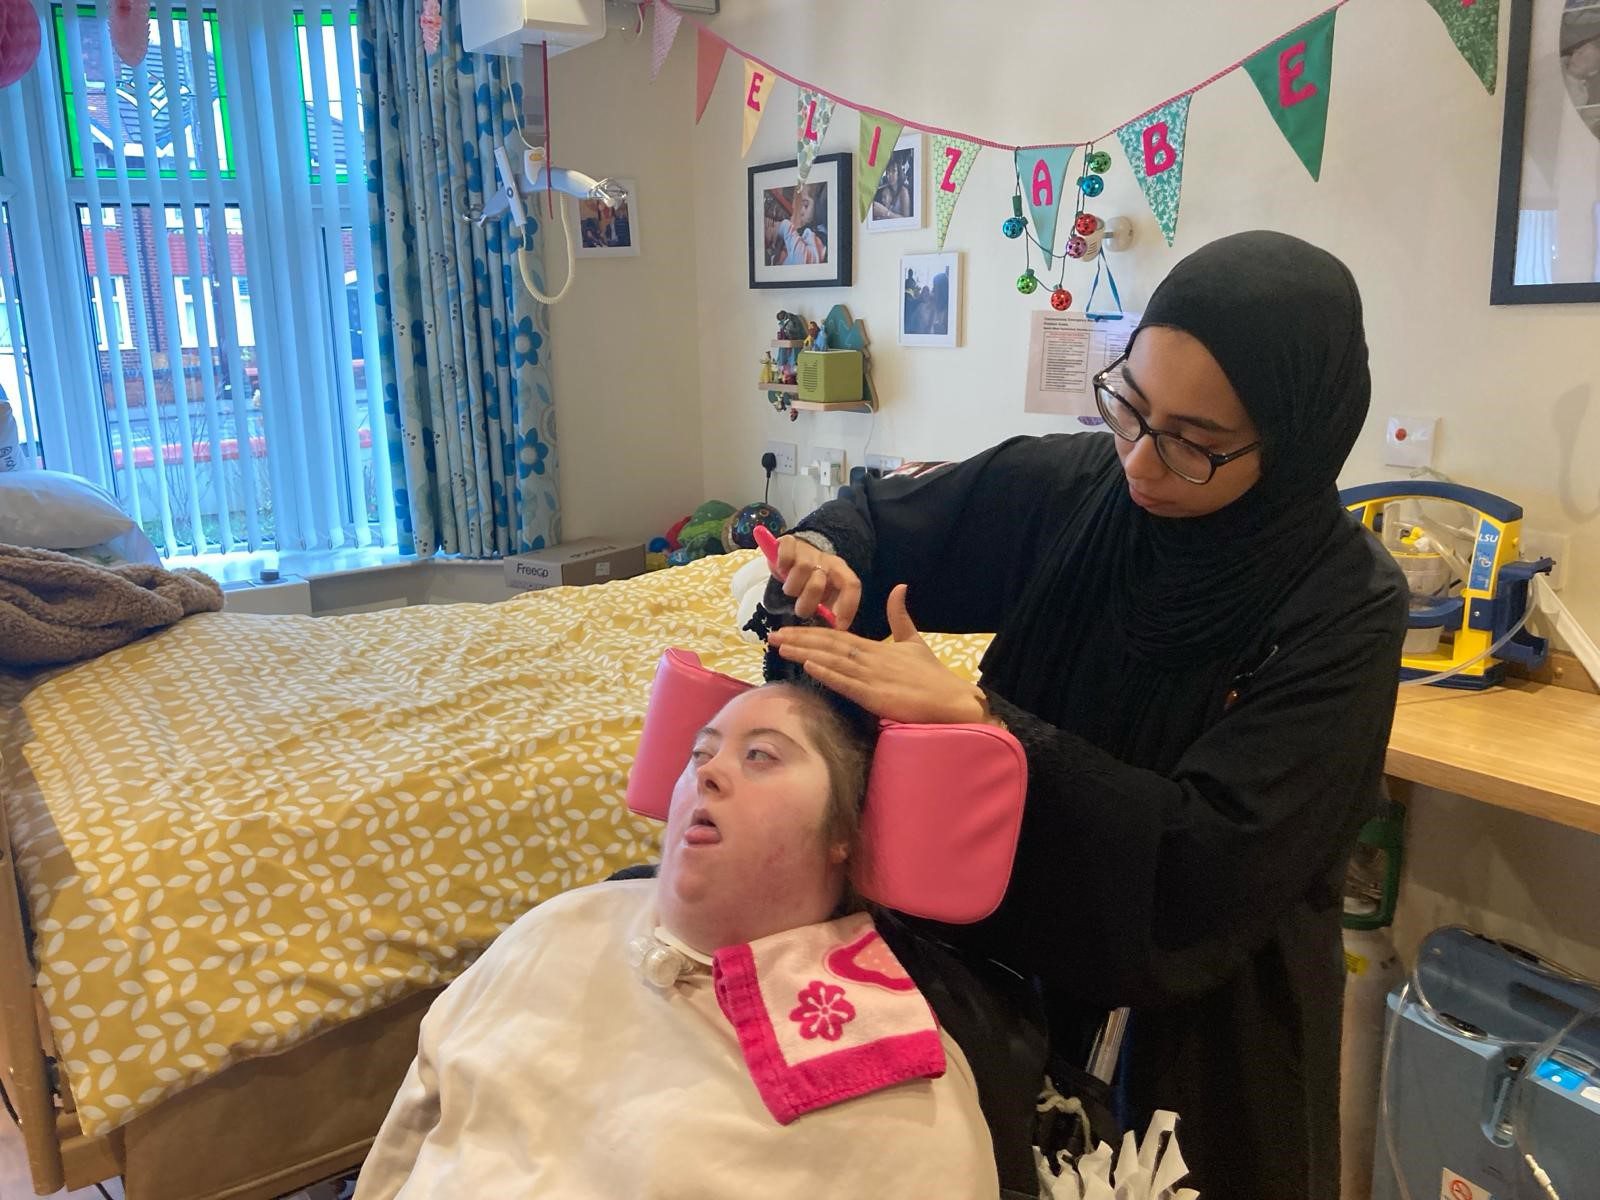 Woman brushing the hair of a young woman in a wheelchair in a bedroom setting with bunting